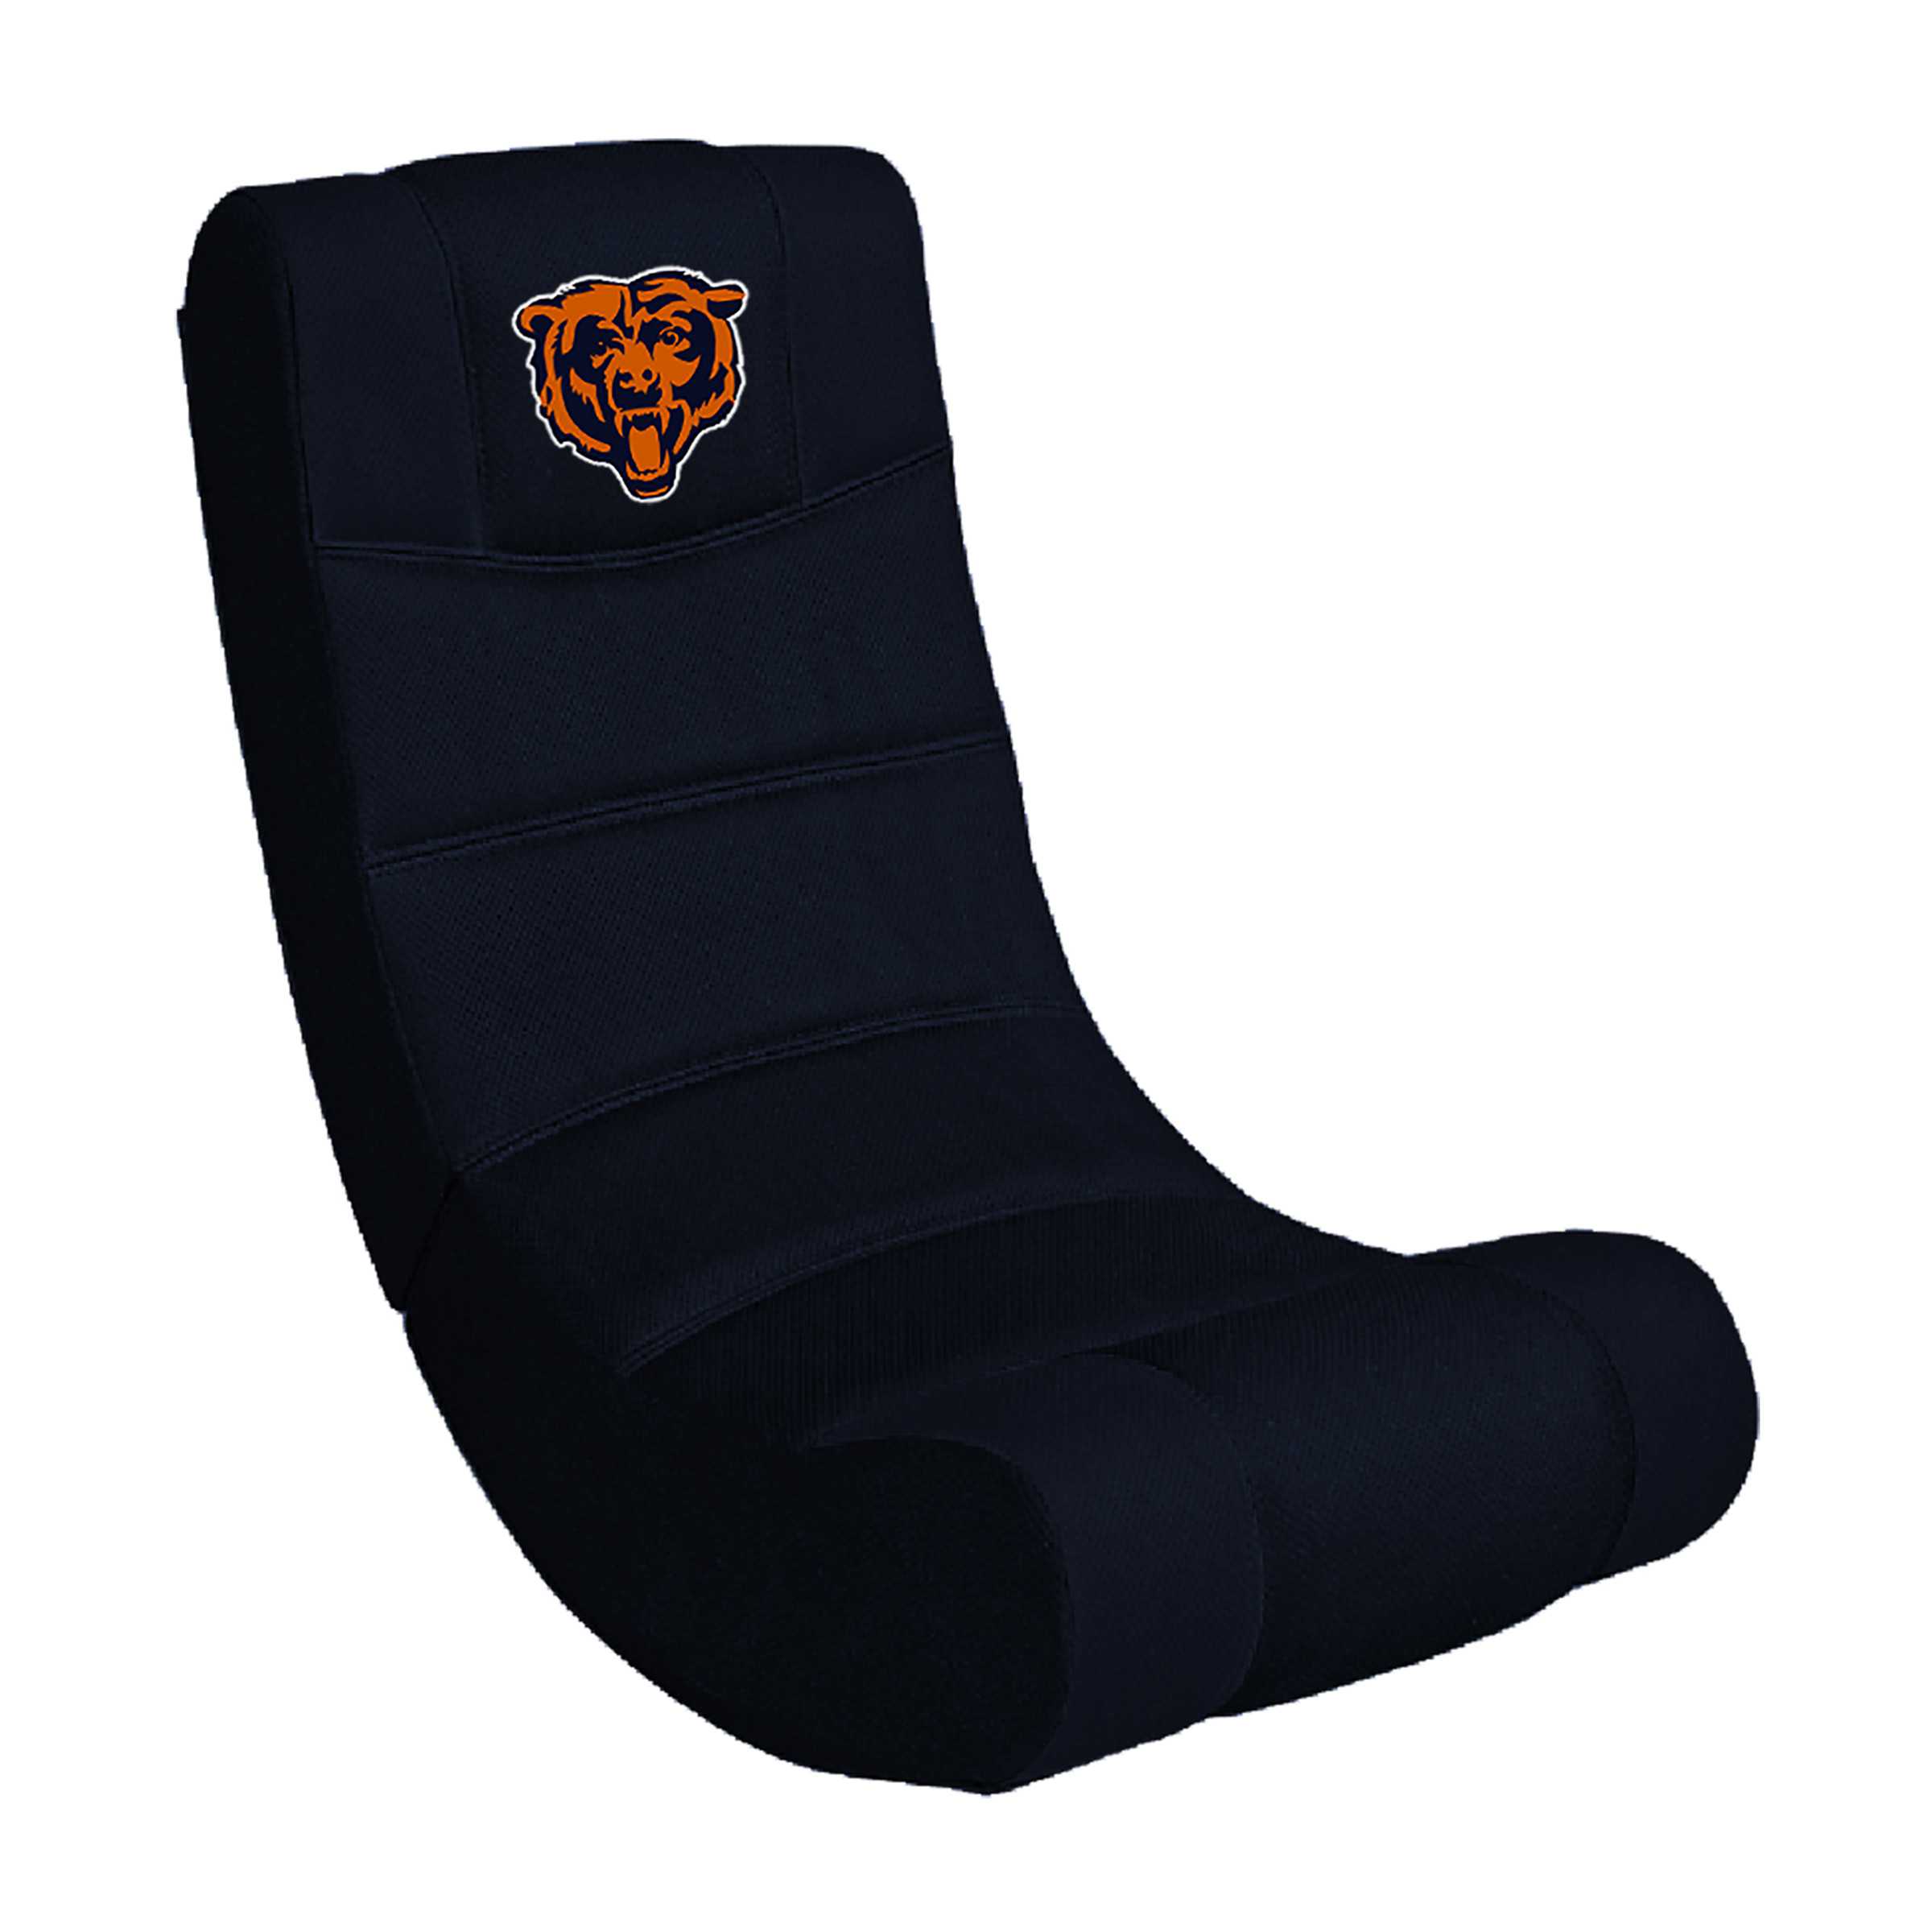 CHICAGO BEARS VIDEO CHAIR